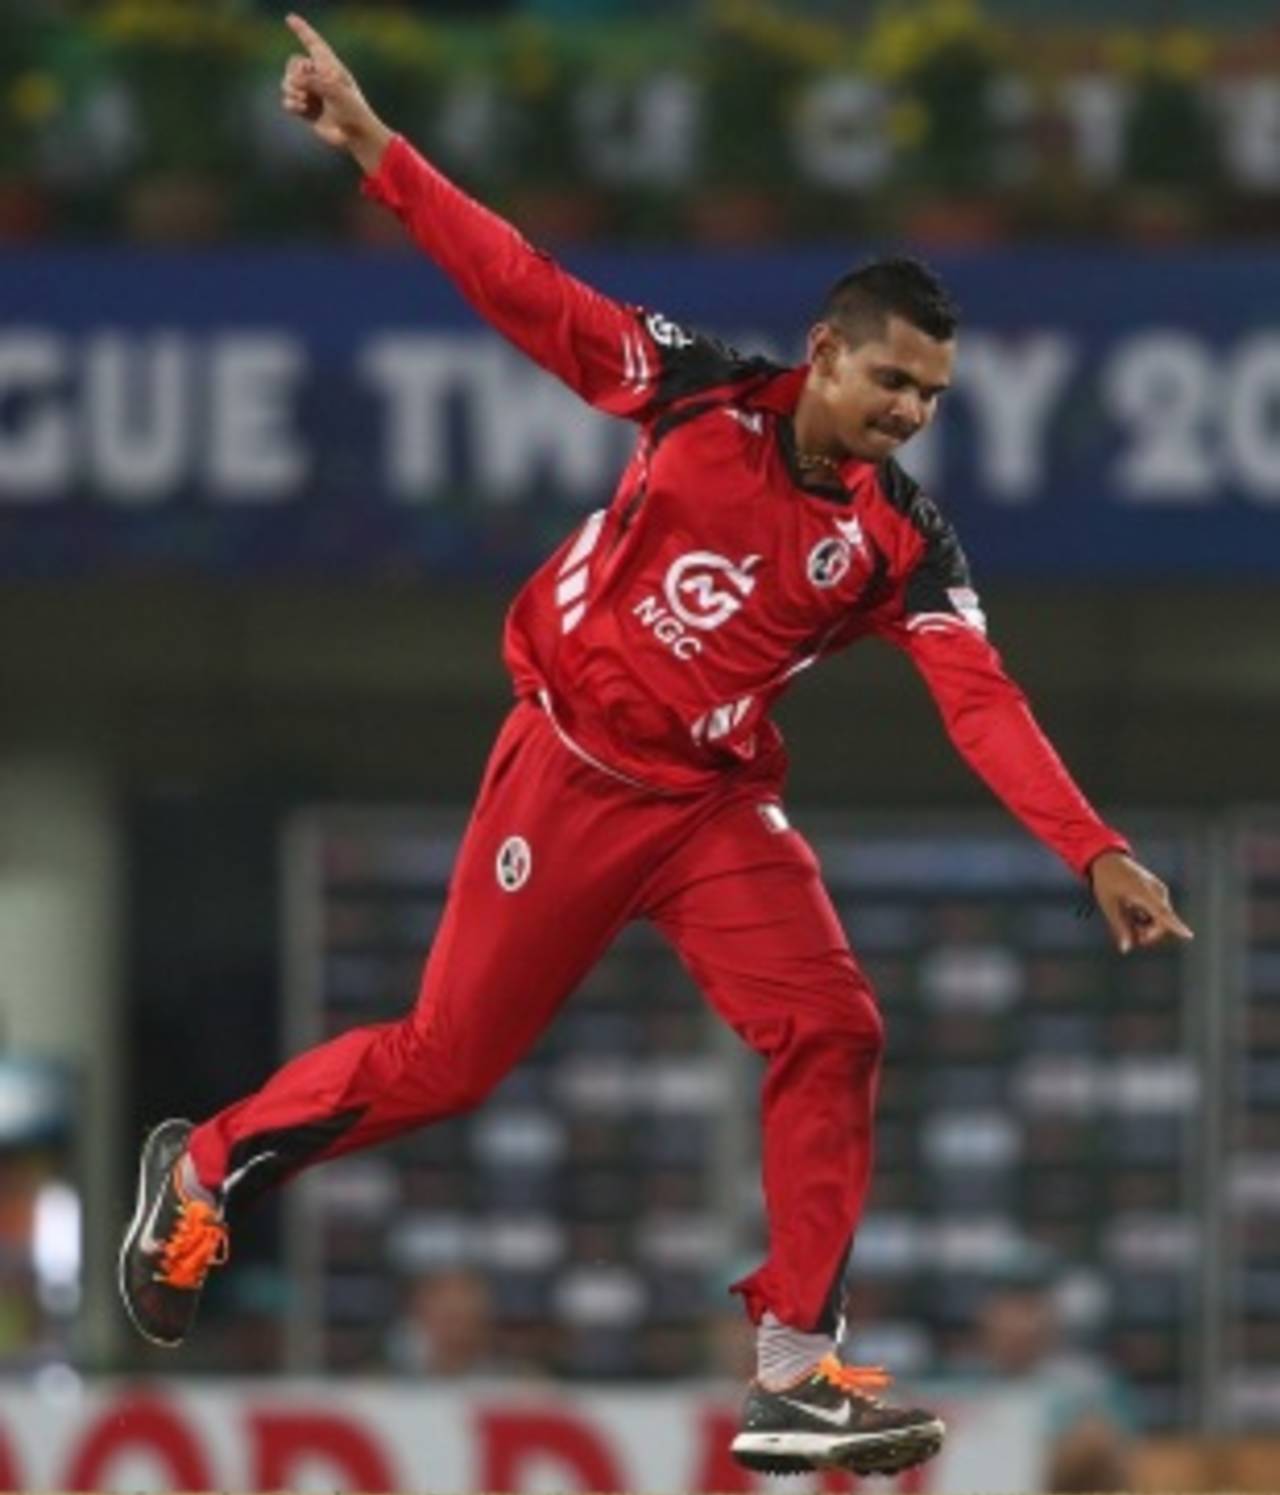 Sunil Narine will represent Cobras in South Africa's domestic Twenty20 competition this year&nbsp;&nbsp;&bull;&nbsp;&nbsp;BCCI